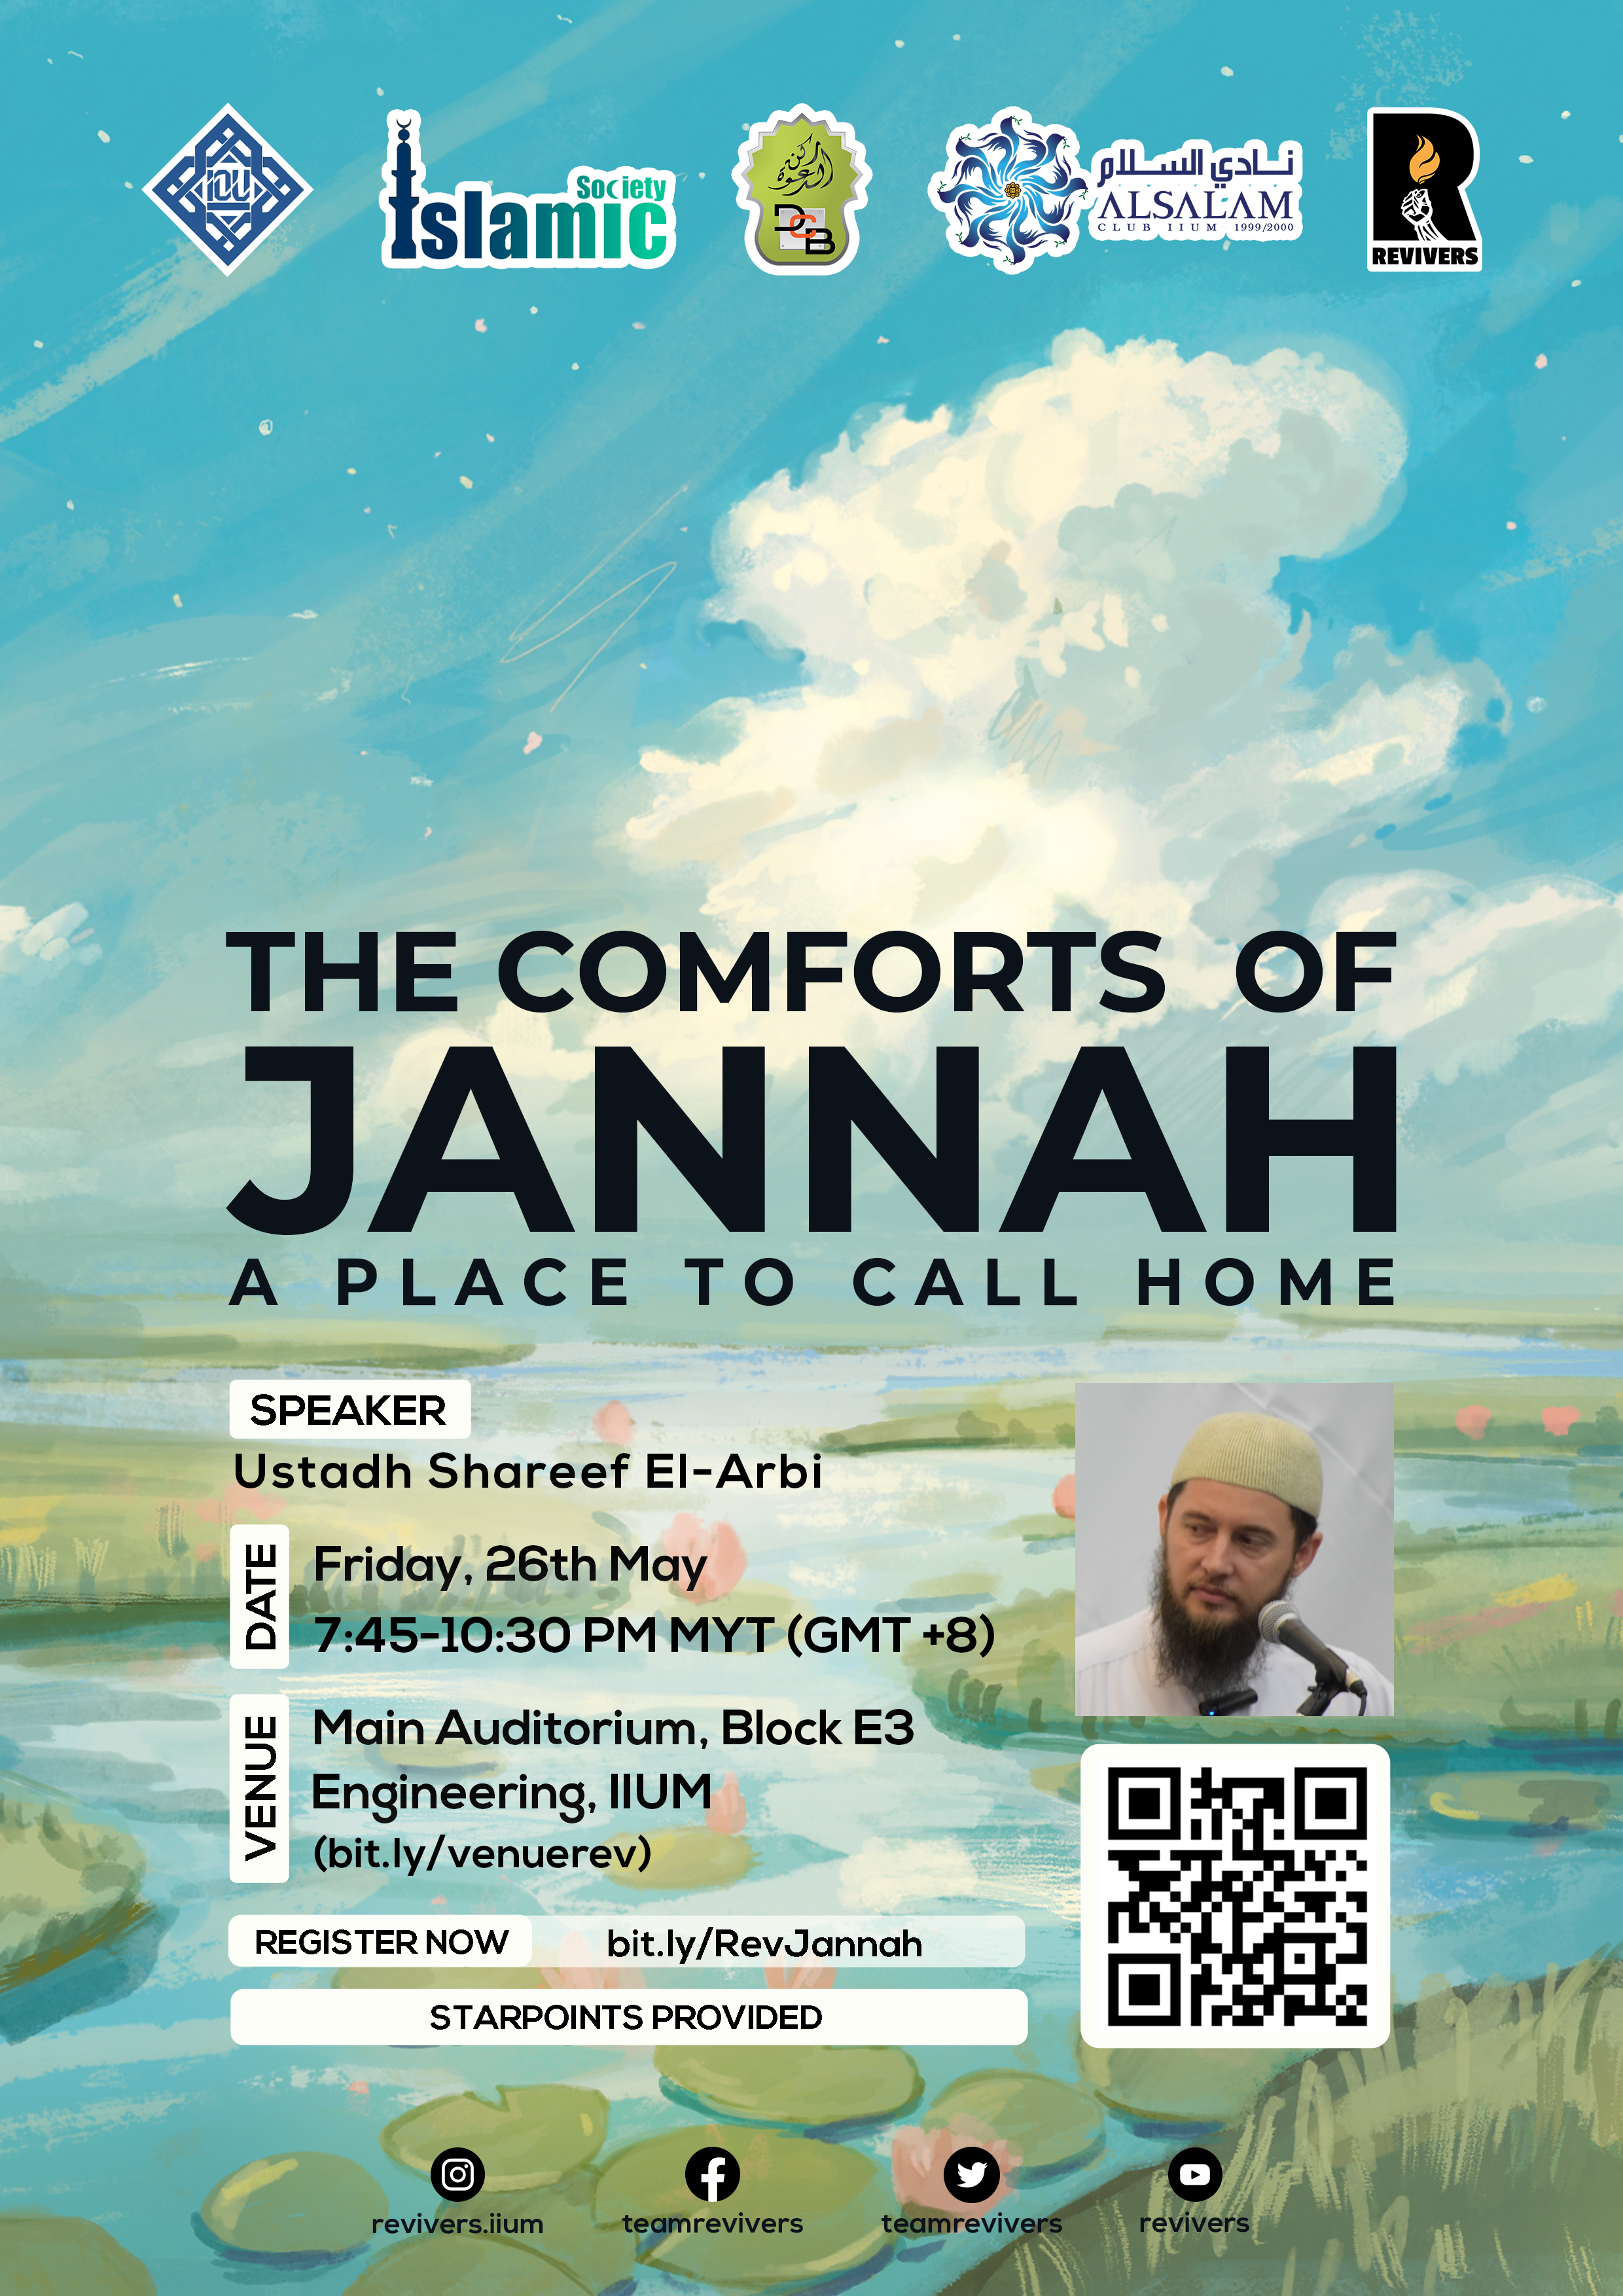 ​THE COMFORTS OF JANNAH A PLACE TO CALL HOME